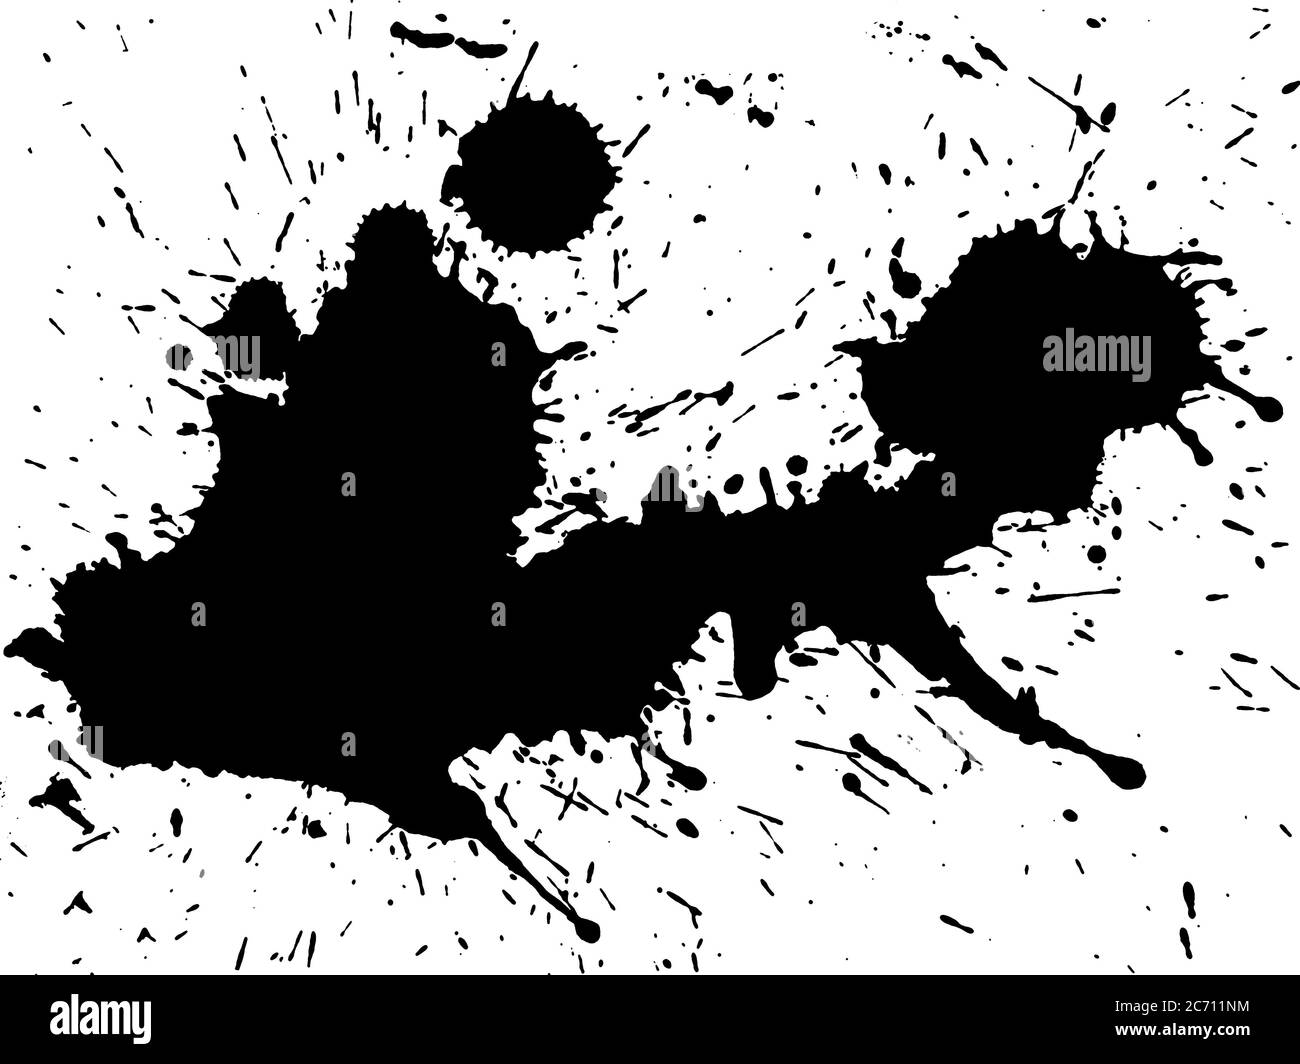 Blood splatter Black and White Stock Photos & Images - Alamy